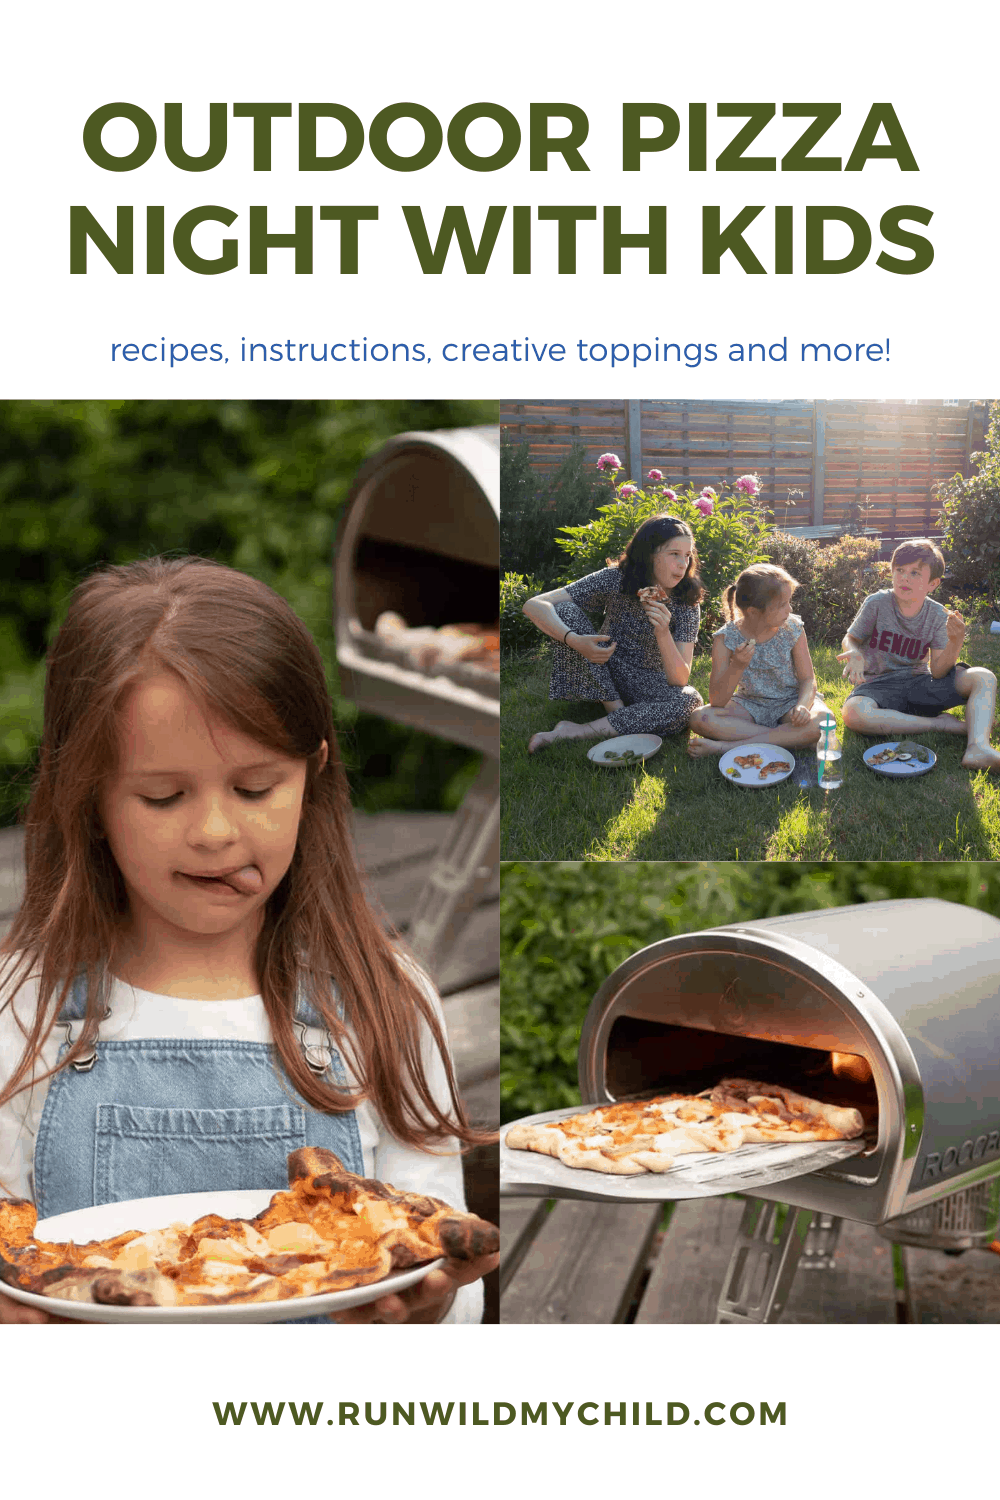 Cooking Pizza Outside - outdoor pizza night with kids